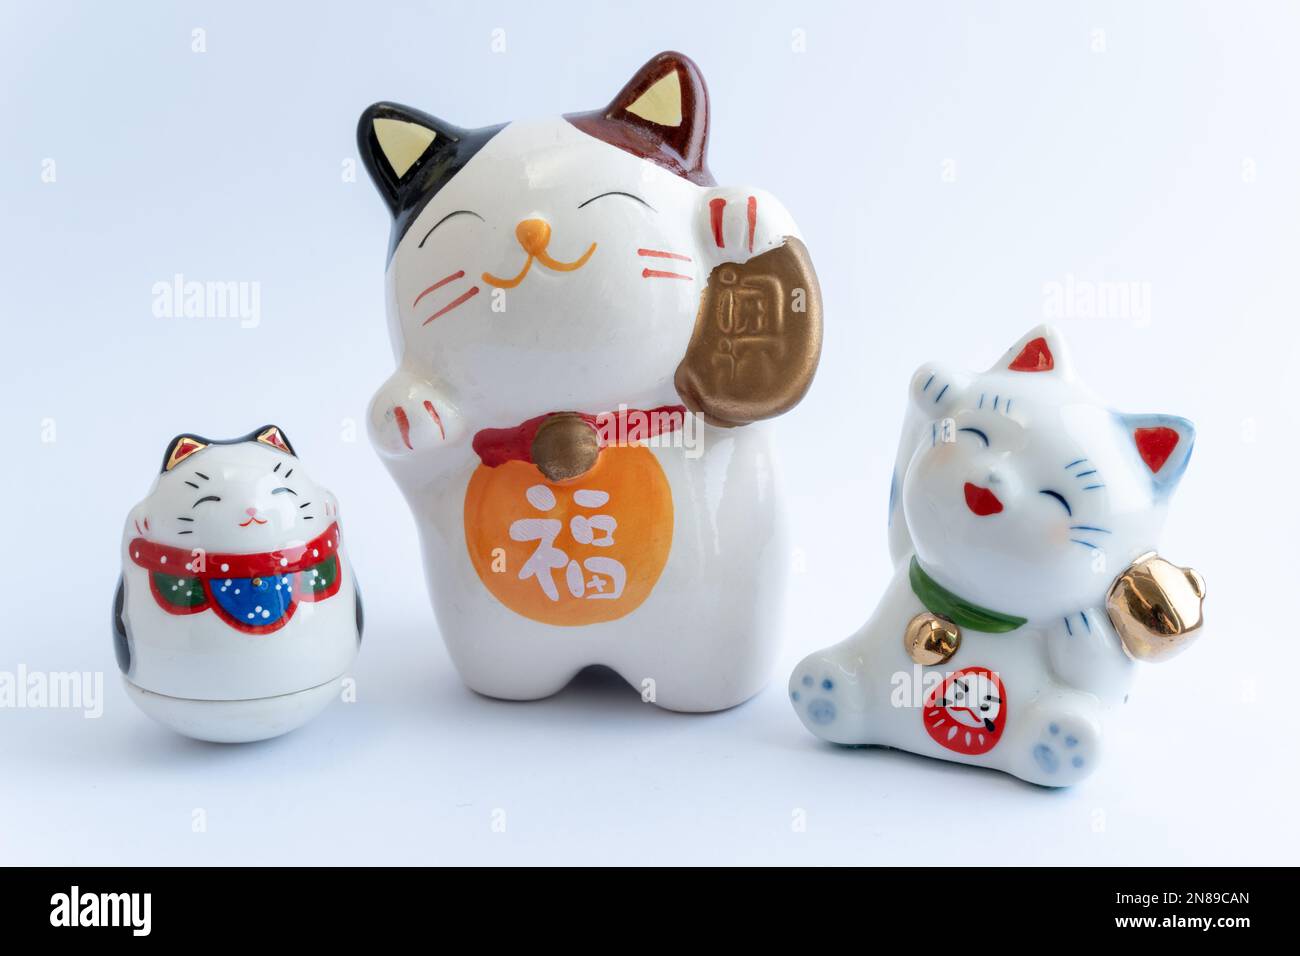 A Maneki-neko or also known as fortune cat in porcelain. Symbolizing luck and wealth, on a white isolated background. Stock Photo